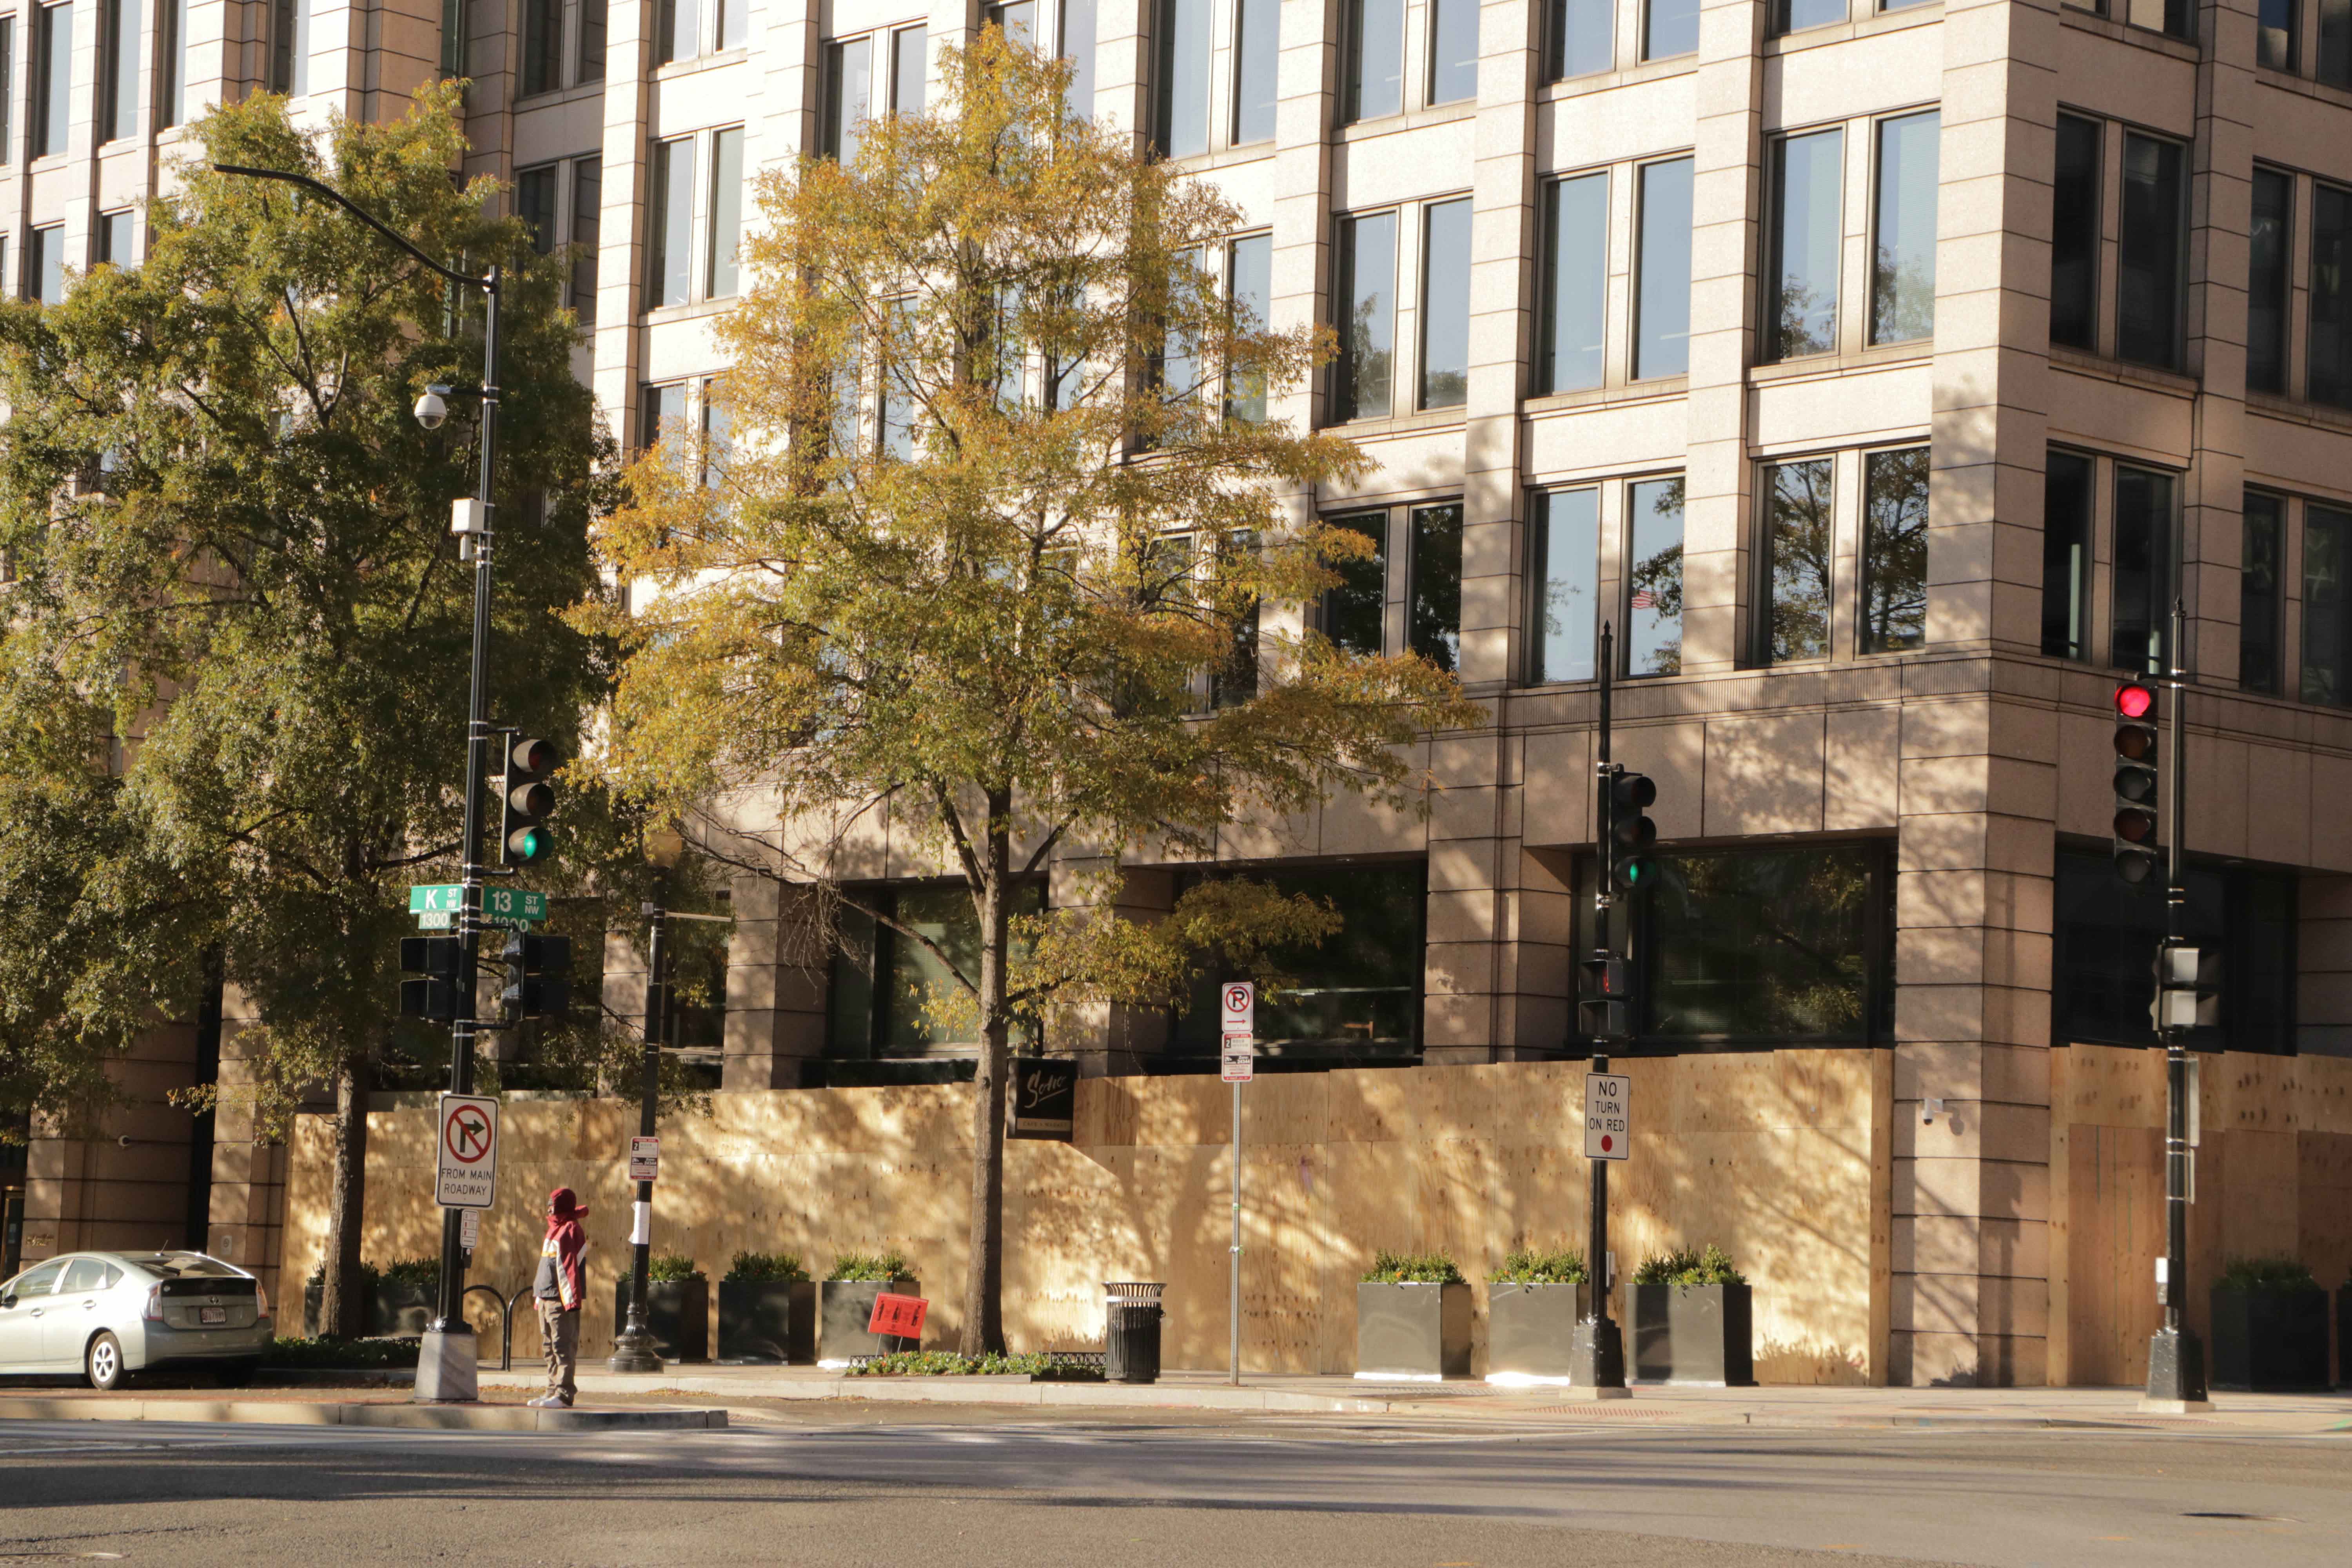 The Washington Post's building in the capital was boarded up with plywood.